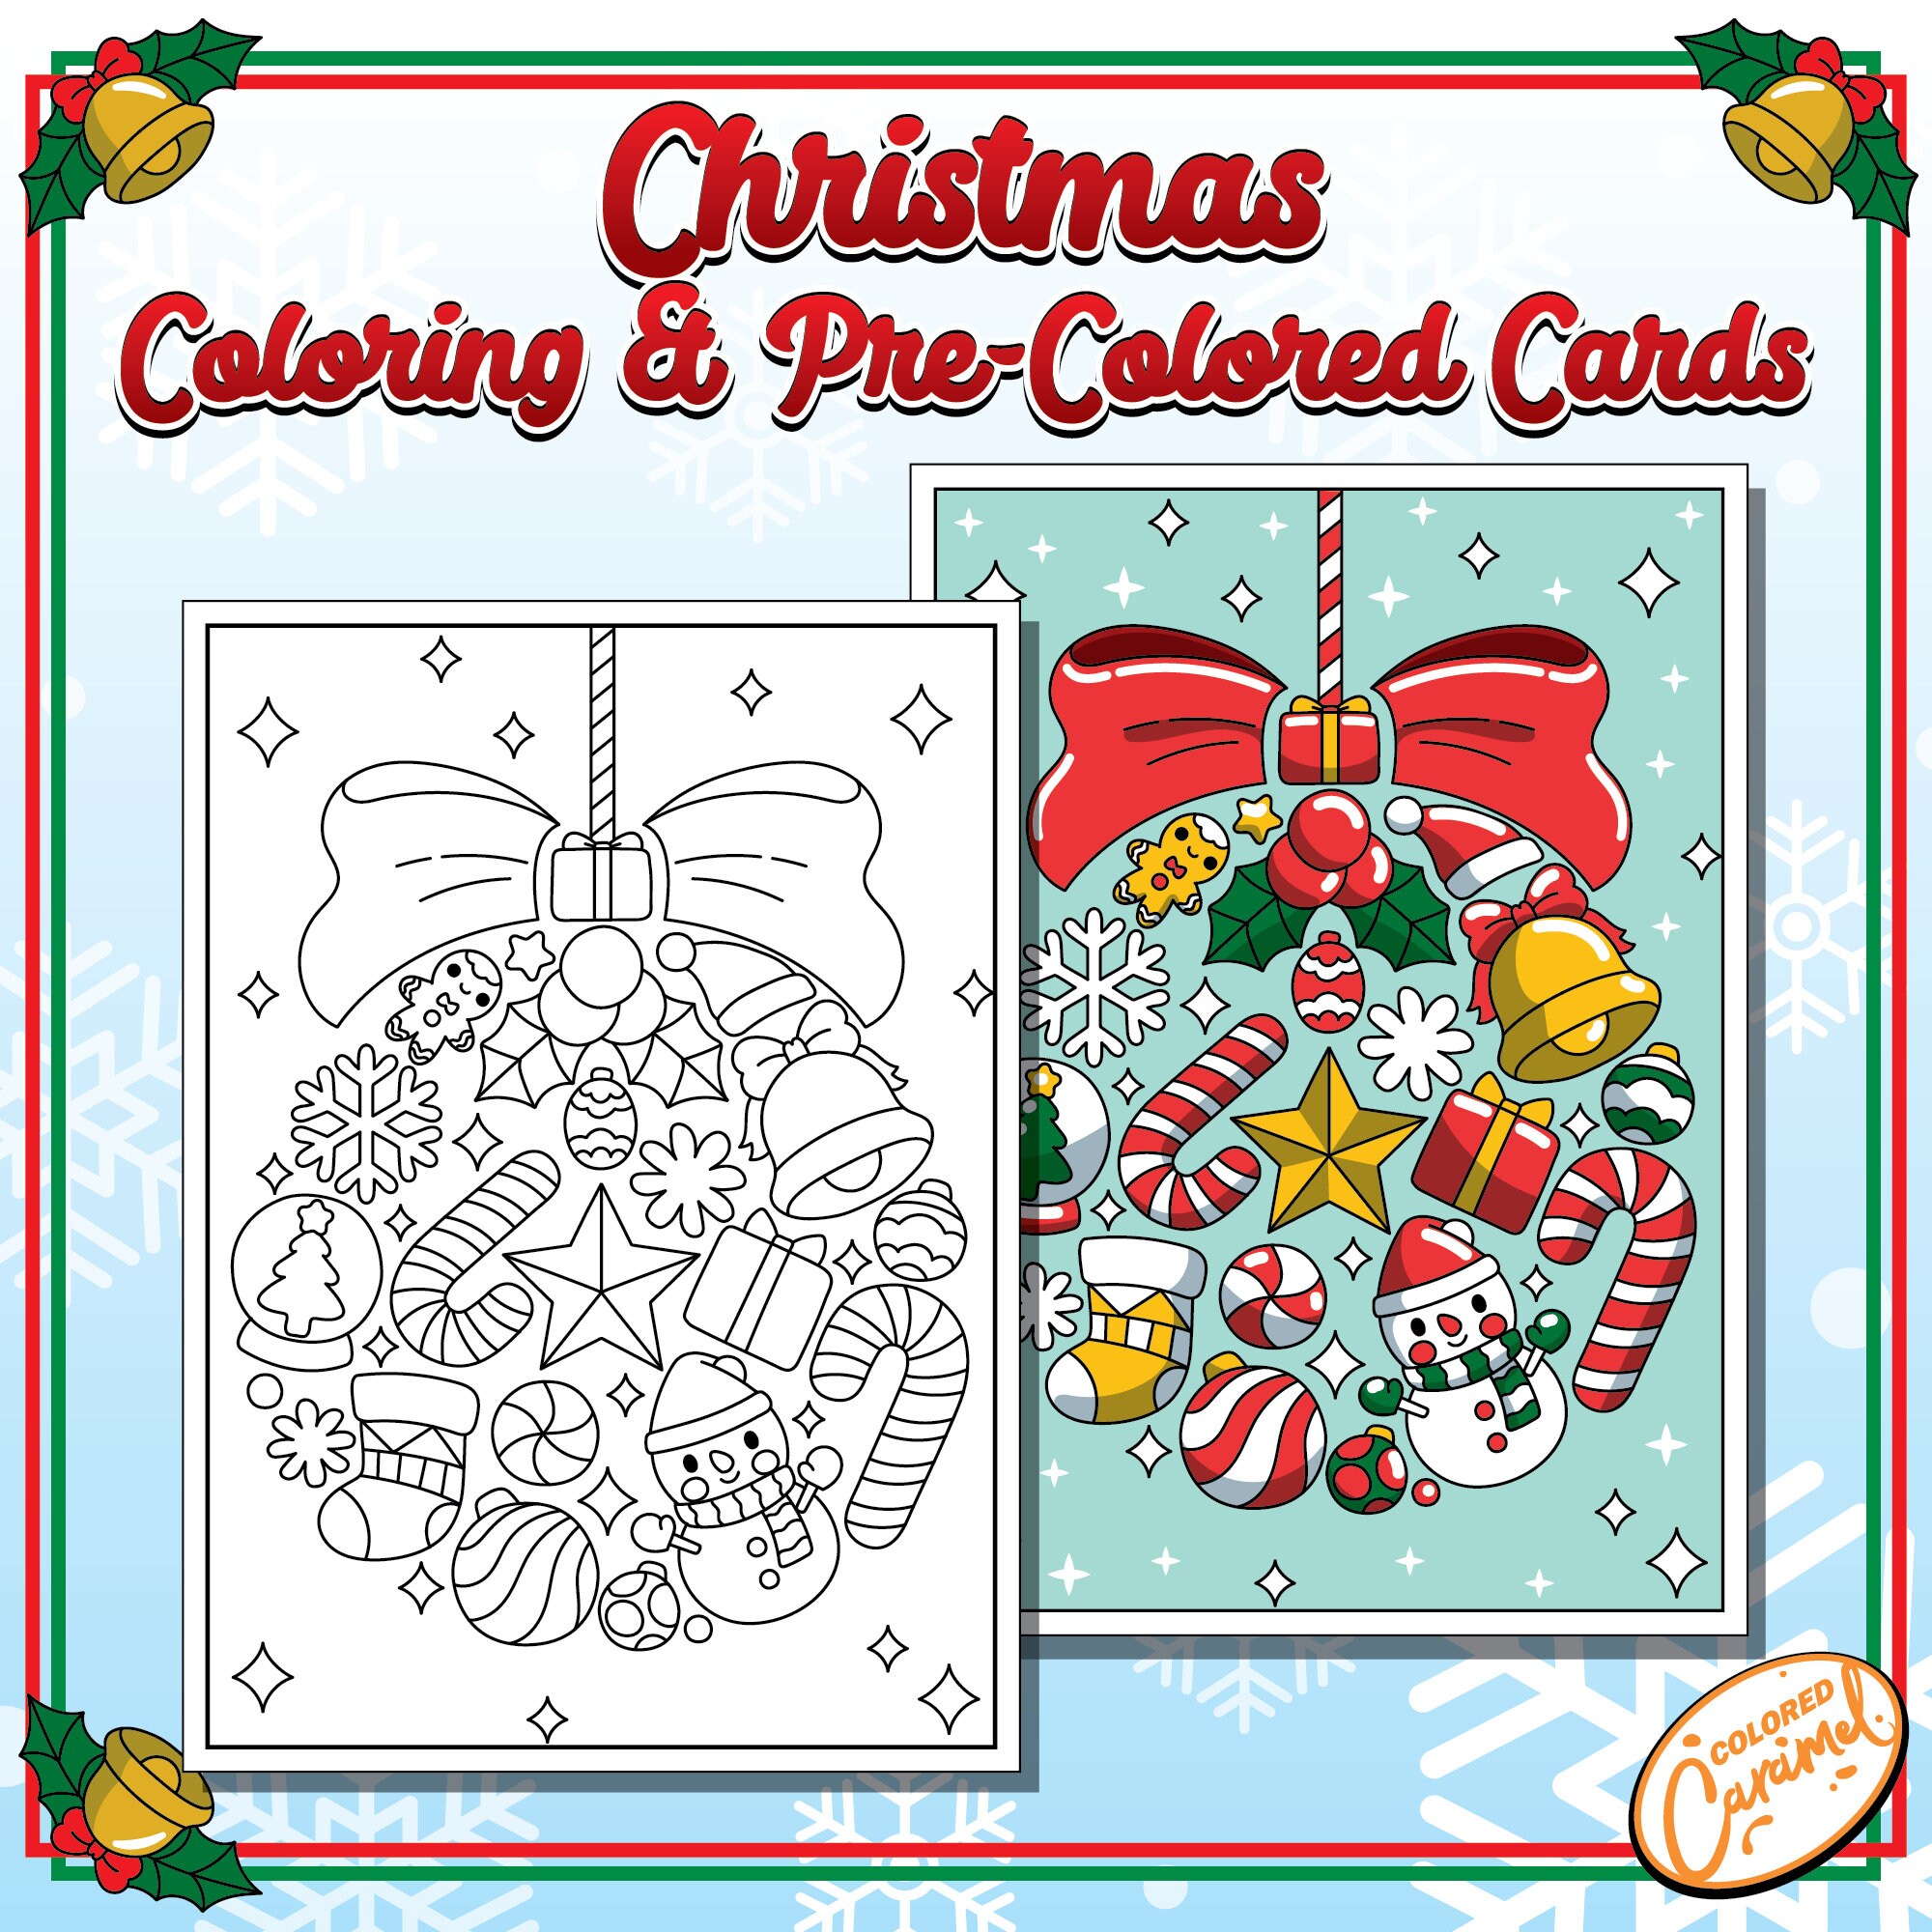 Merry Christmas Coloring Card, Colorable and Pre-colored Holiday Greeting Card, DIY Festive and Joyful Printable Instant Digital Download